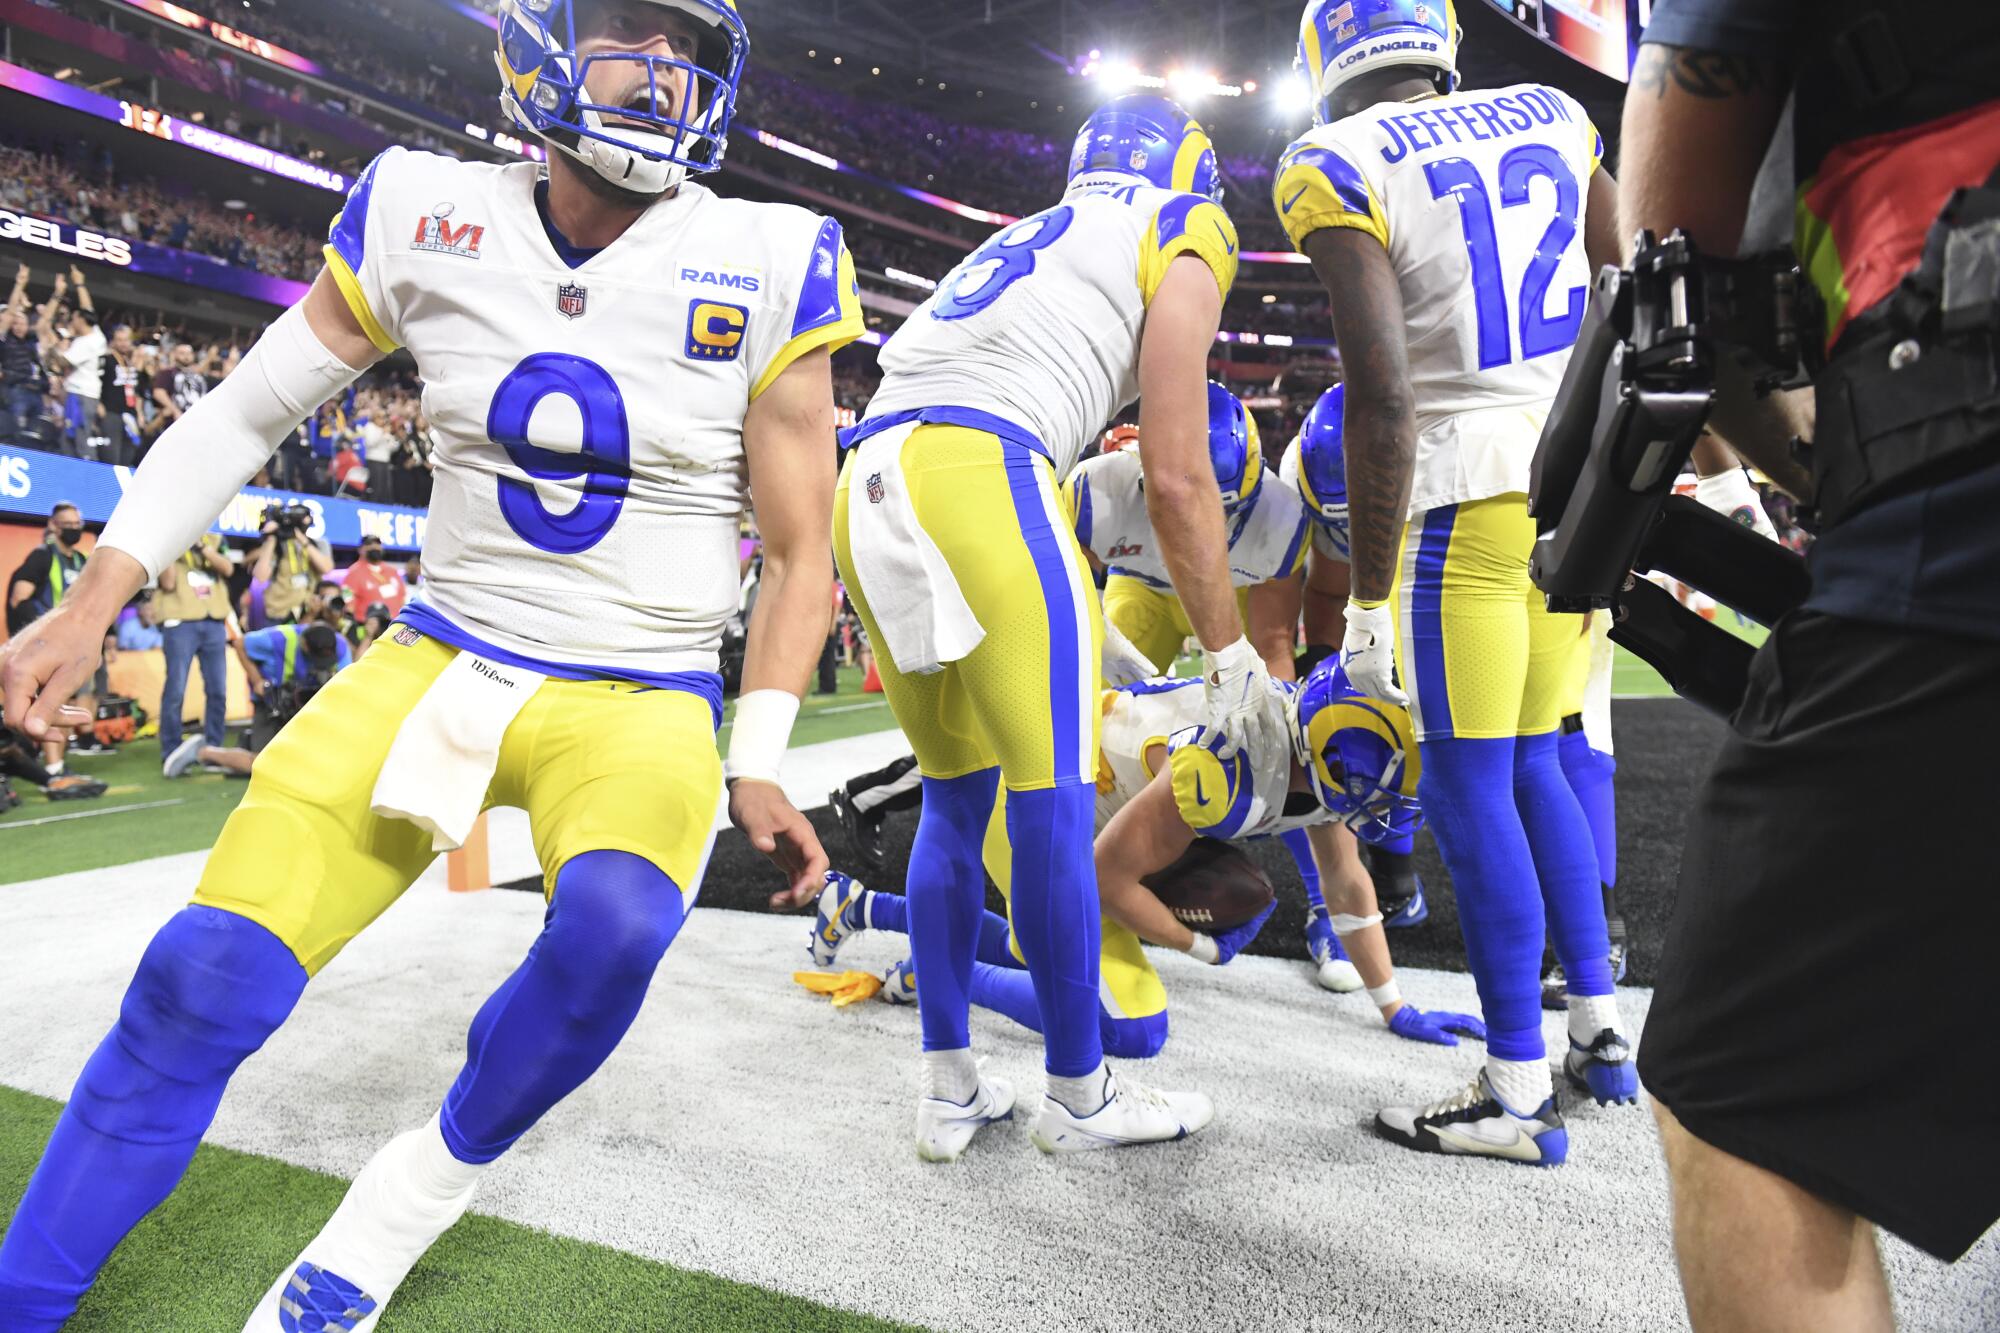  Rams quarterback Matthew Stafford celebrates after throwing a touchdown pass that was overturned.